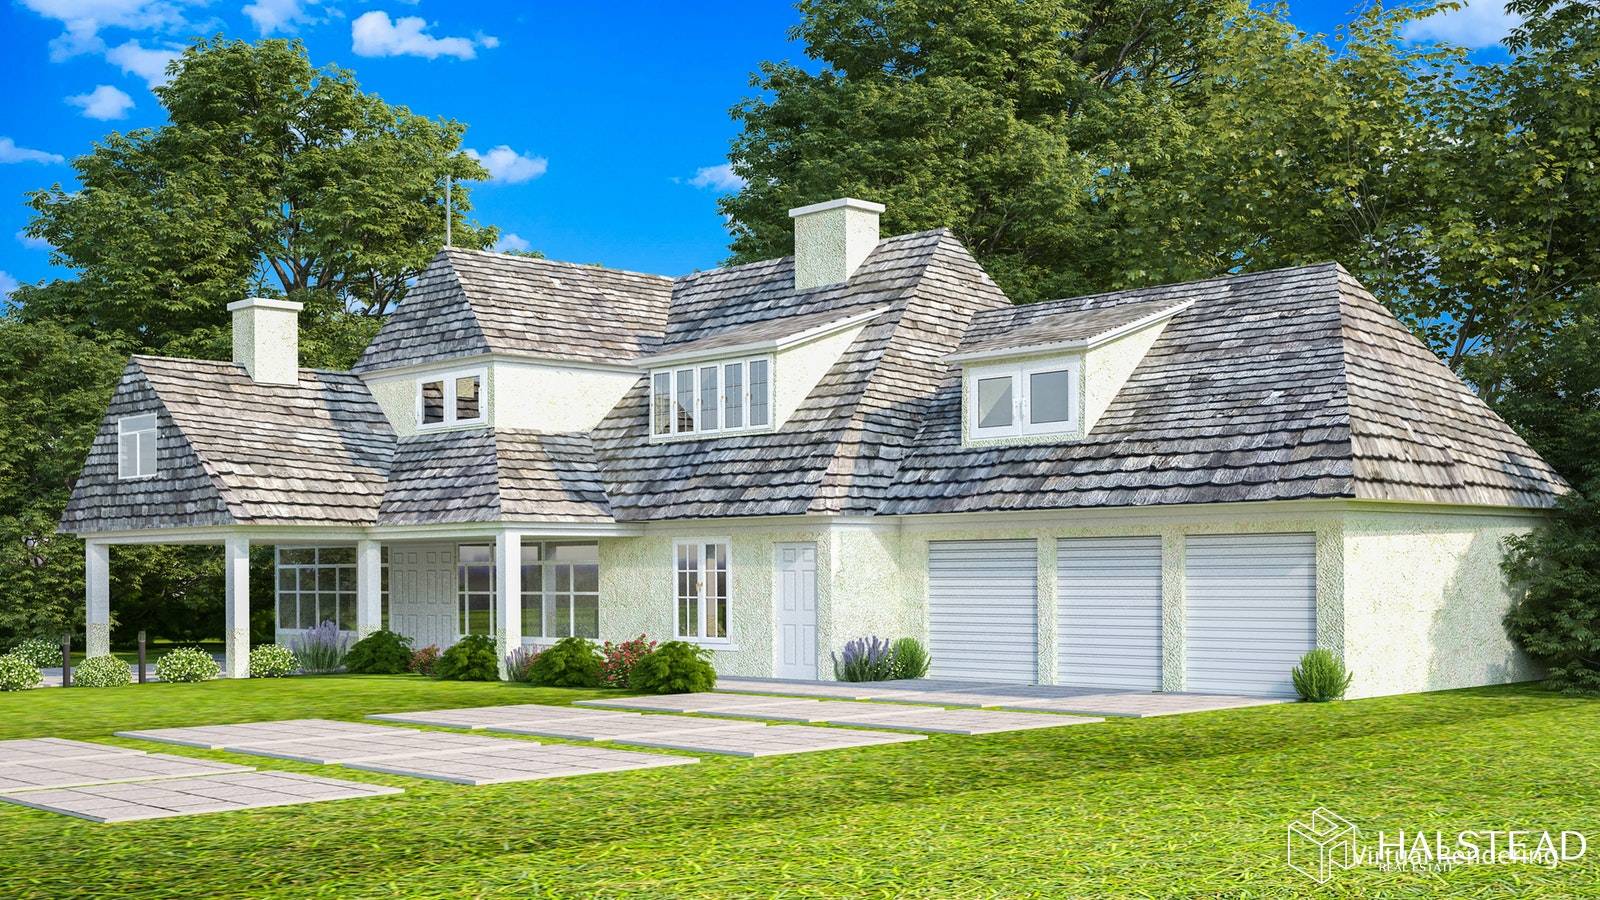 An Extraordinary Opportunity to Build TWO beautiful custom mansions, see attached renderings and topographical drawings, on 1 acres of land for each lot, on a cul de sac located in ...